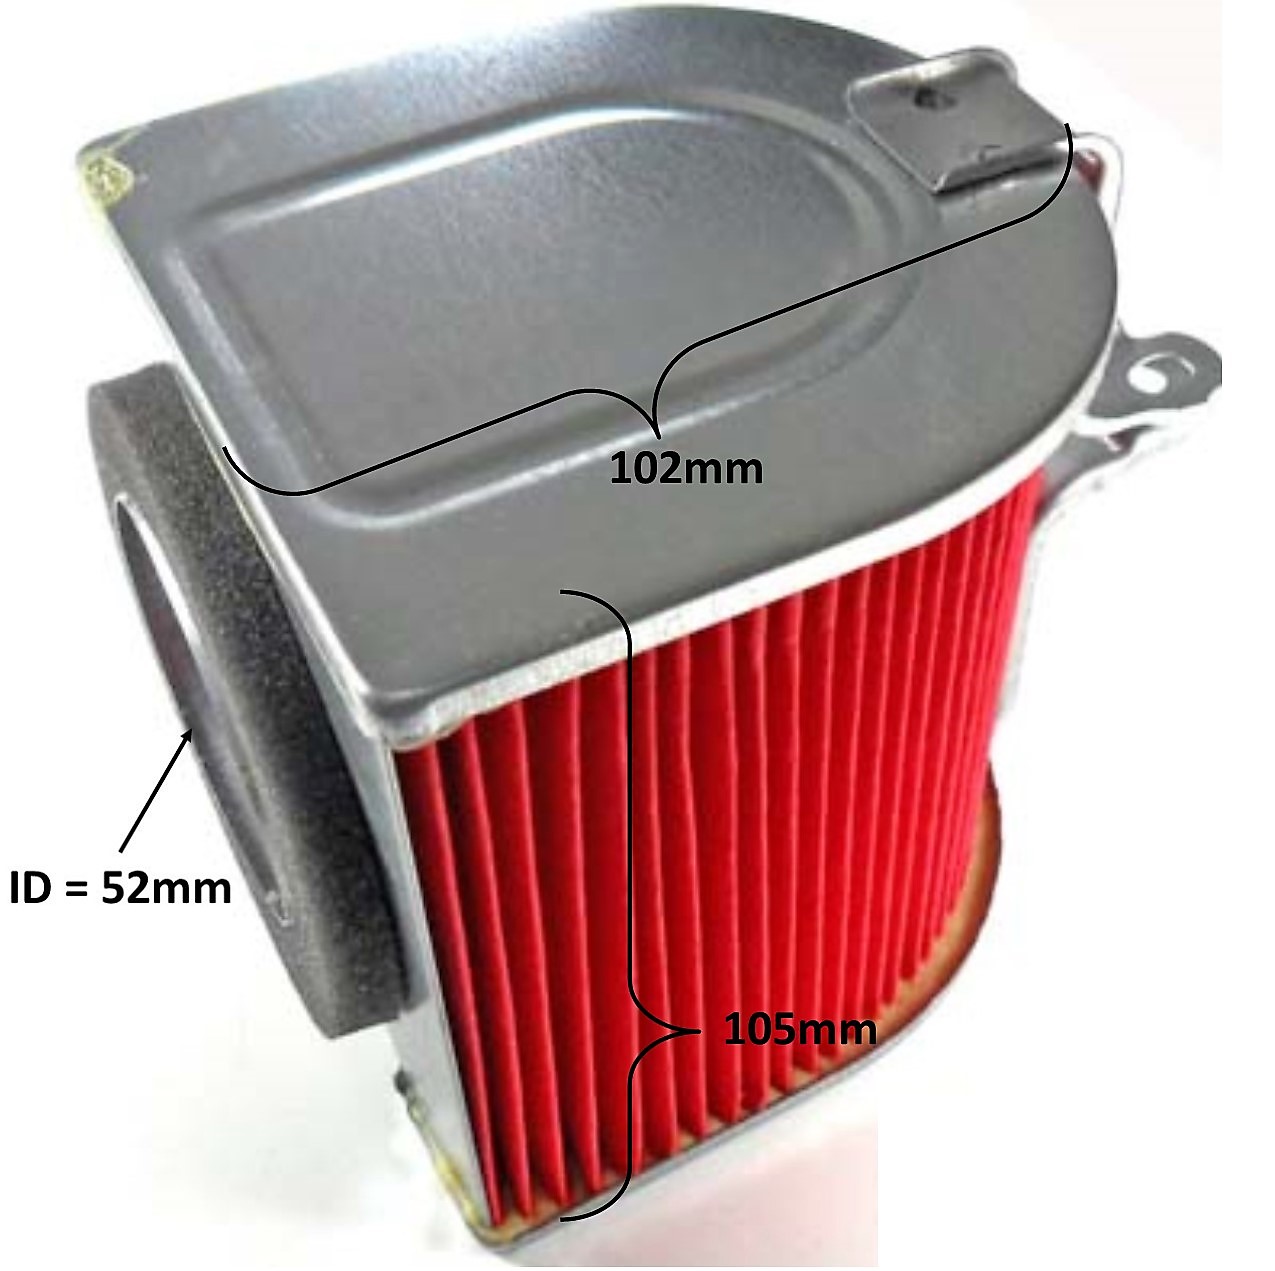 Air Filter 4 Stroke 250cc + others ID=52mm L=105 H=102